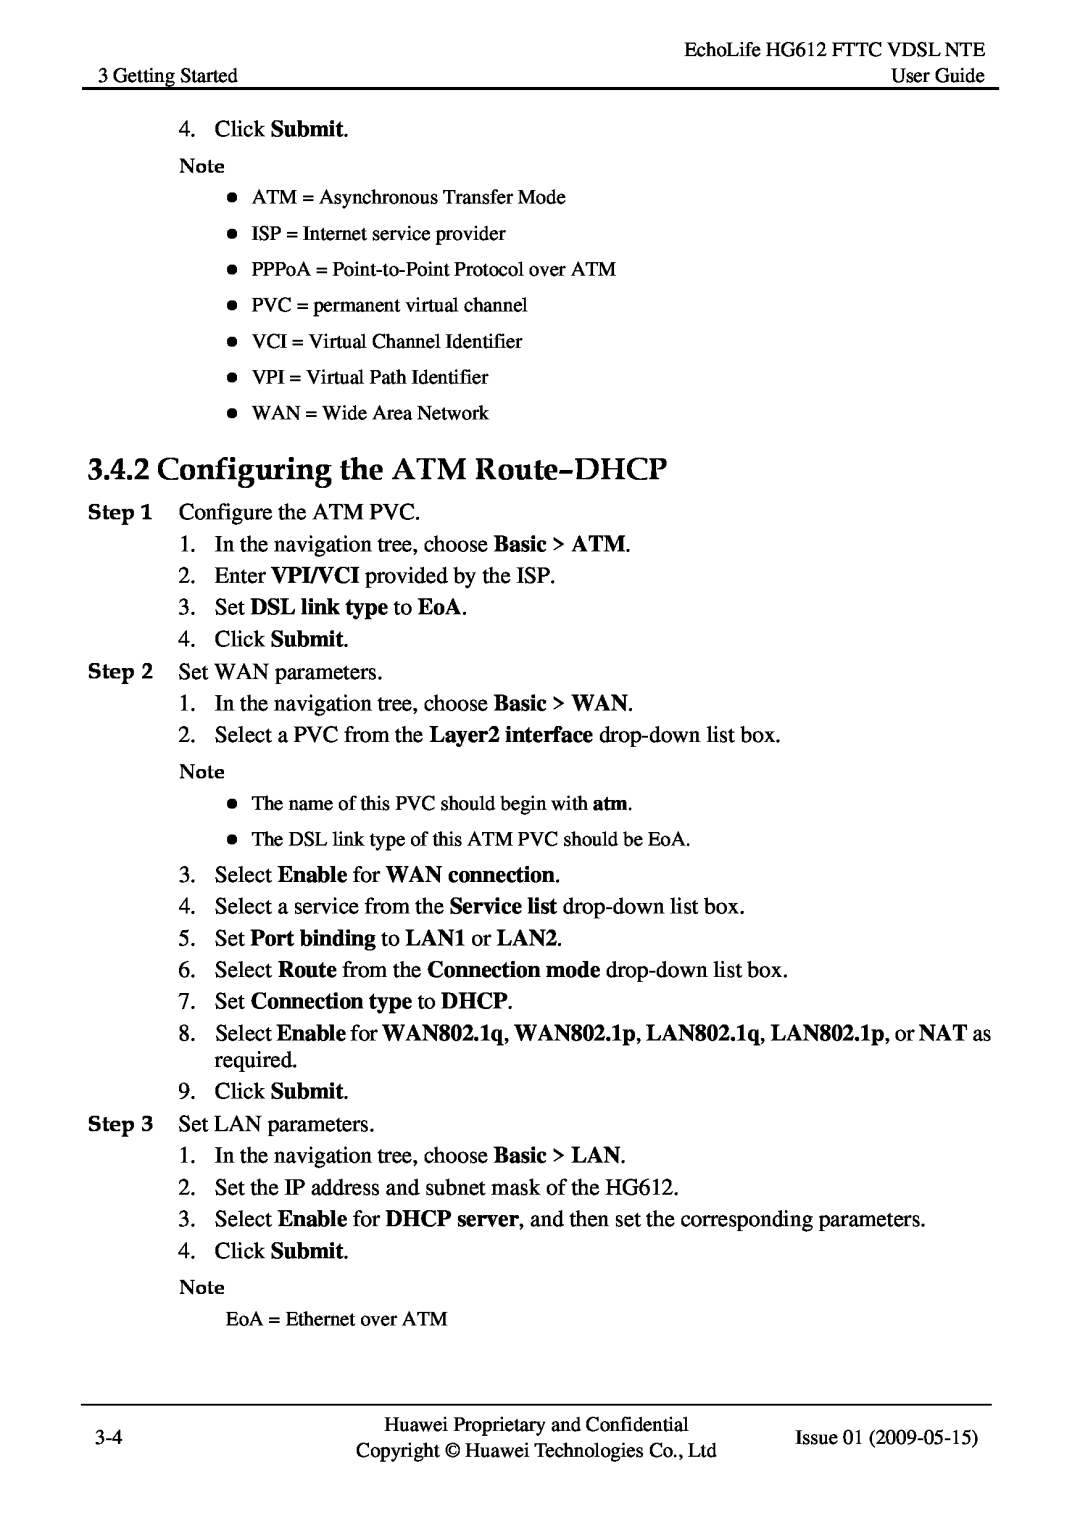 Huawei HG612FTTC VDSL NTE manual Configuring the ATM Route-DHCP, Set DSL link type to EoA, Select Enable for WAN connection 